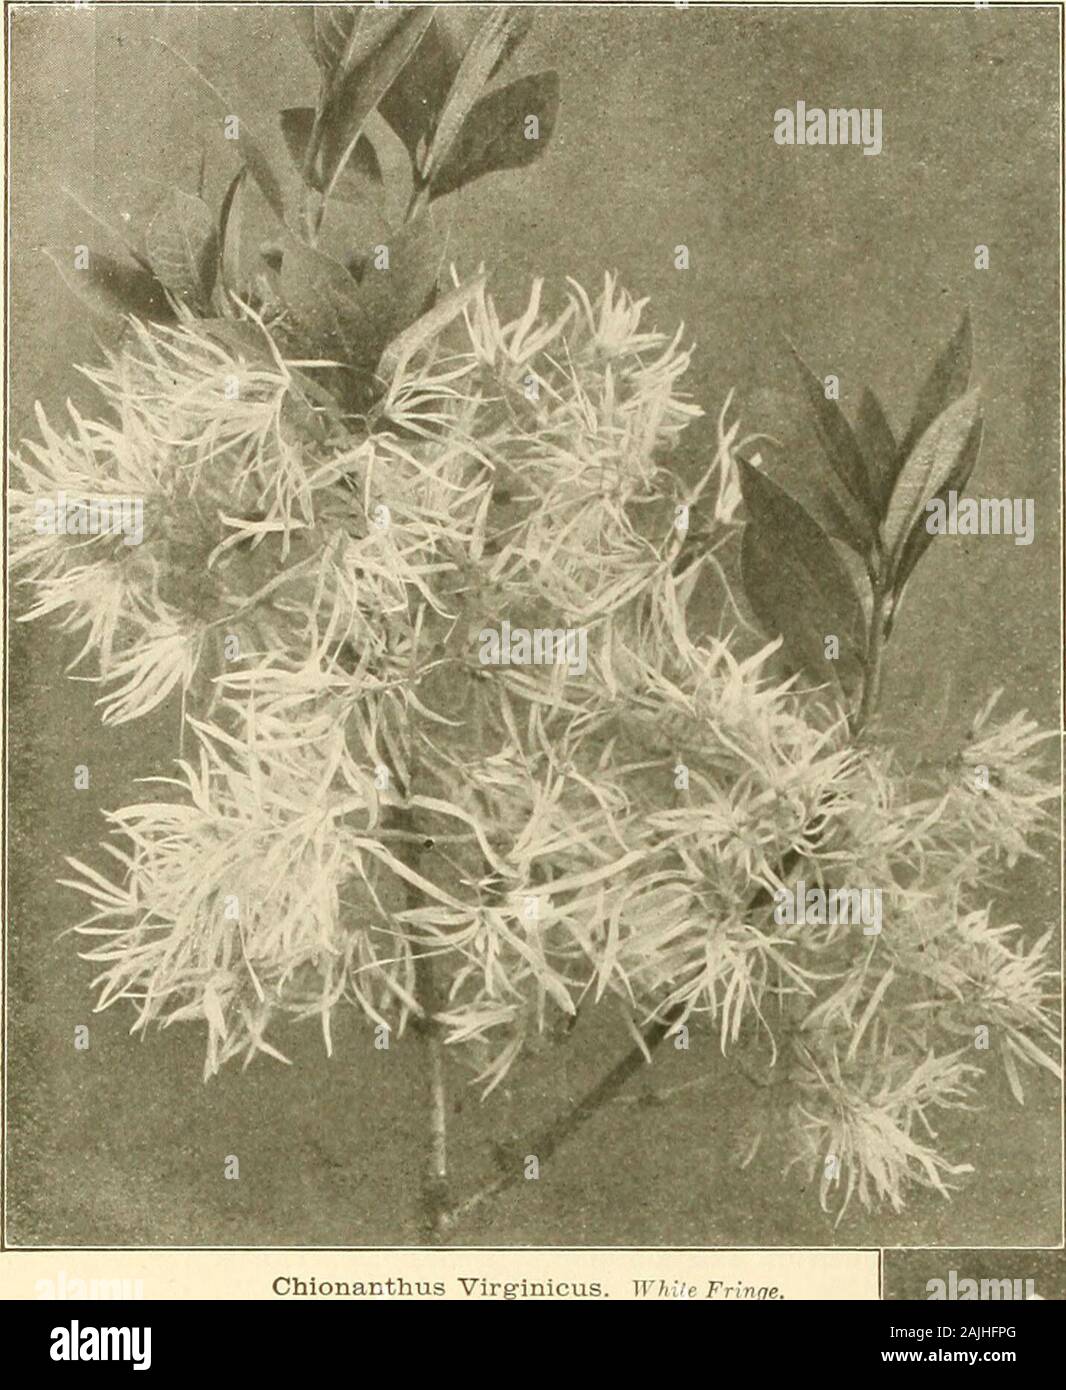 Farquhar's autumn catalogue : 1911 . s; one of our best shrubs Baccharis halmifolia. Feathery white flowers. Sept Berberis purpurea. Dark purple foliage .Thunbergji. Japan Barberry. Dwarf, hand-some, shining foliage. June ....Vulgaris. Common Barberry. JuneCalycanthus Floridus. Spice Bush. Brown Each$0.60 June to September .Siberian Pea. An in-flowers yellow, pea- Frinoe Tree. White. flowers; fragrant, Caragana arborescens.teresting shrub;shaped. May Chionanthus Virginicus. June Clethra alnifolia. Sweet Pepper Bush. White;intensely fragrant; very fine . . Colutea arborescens. Bladder Senna. A Stock Photo